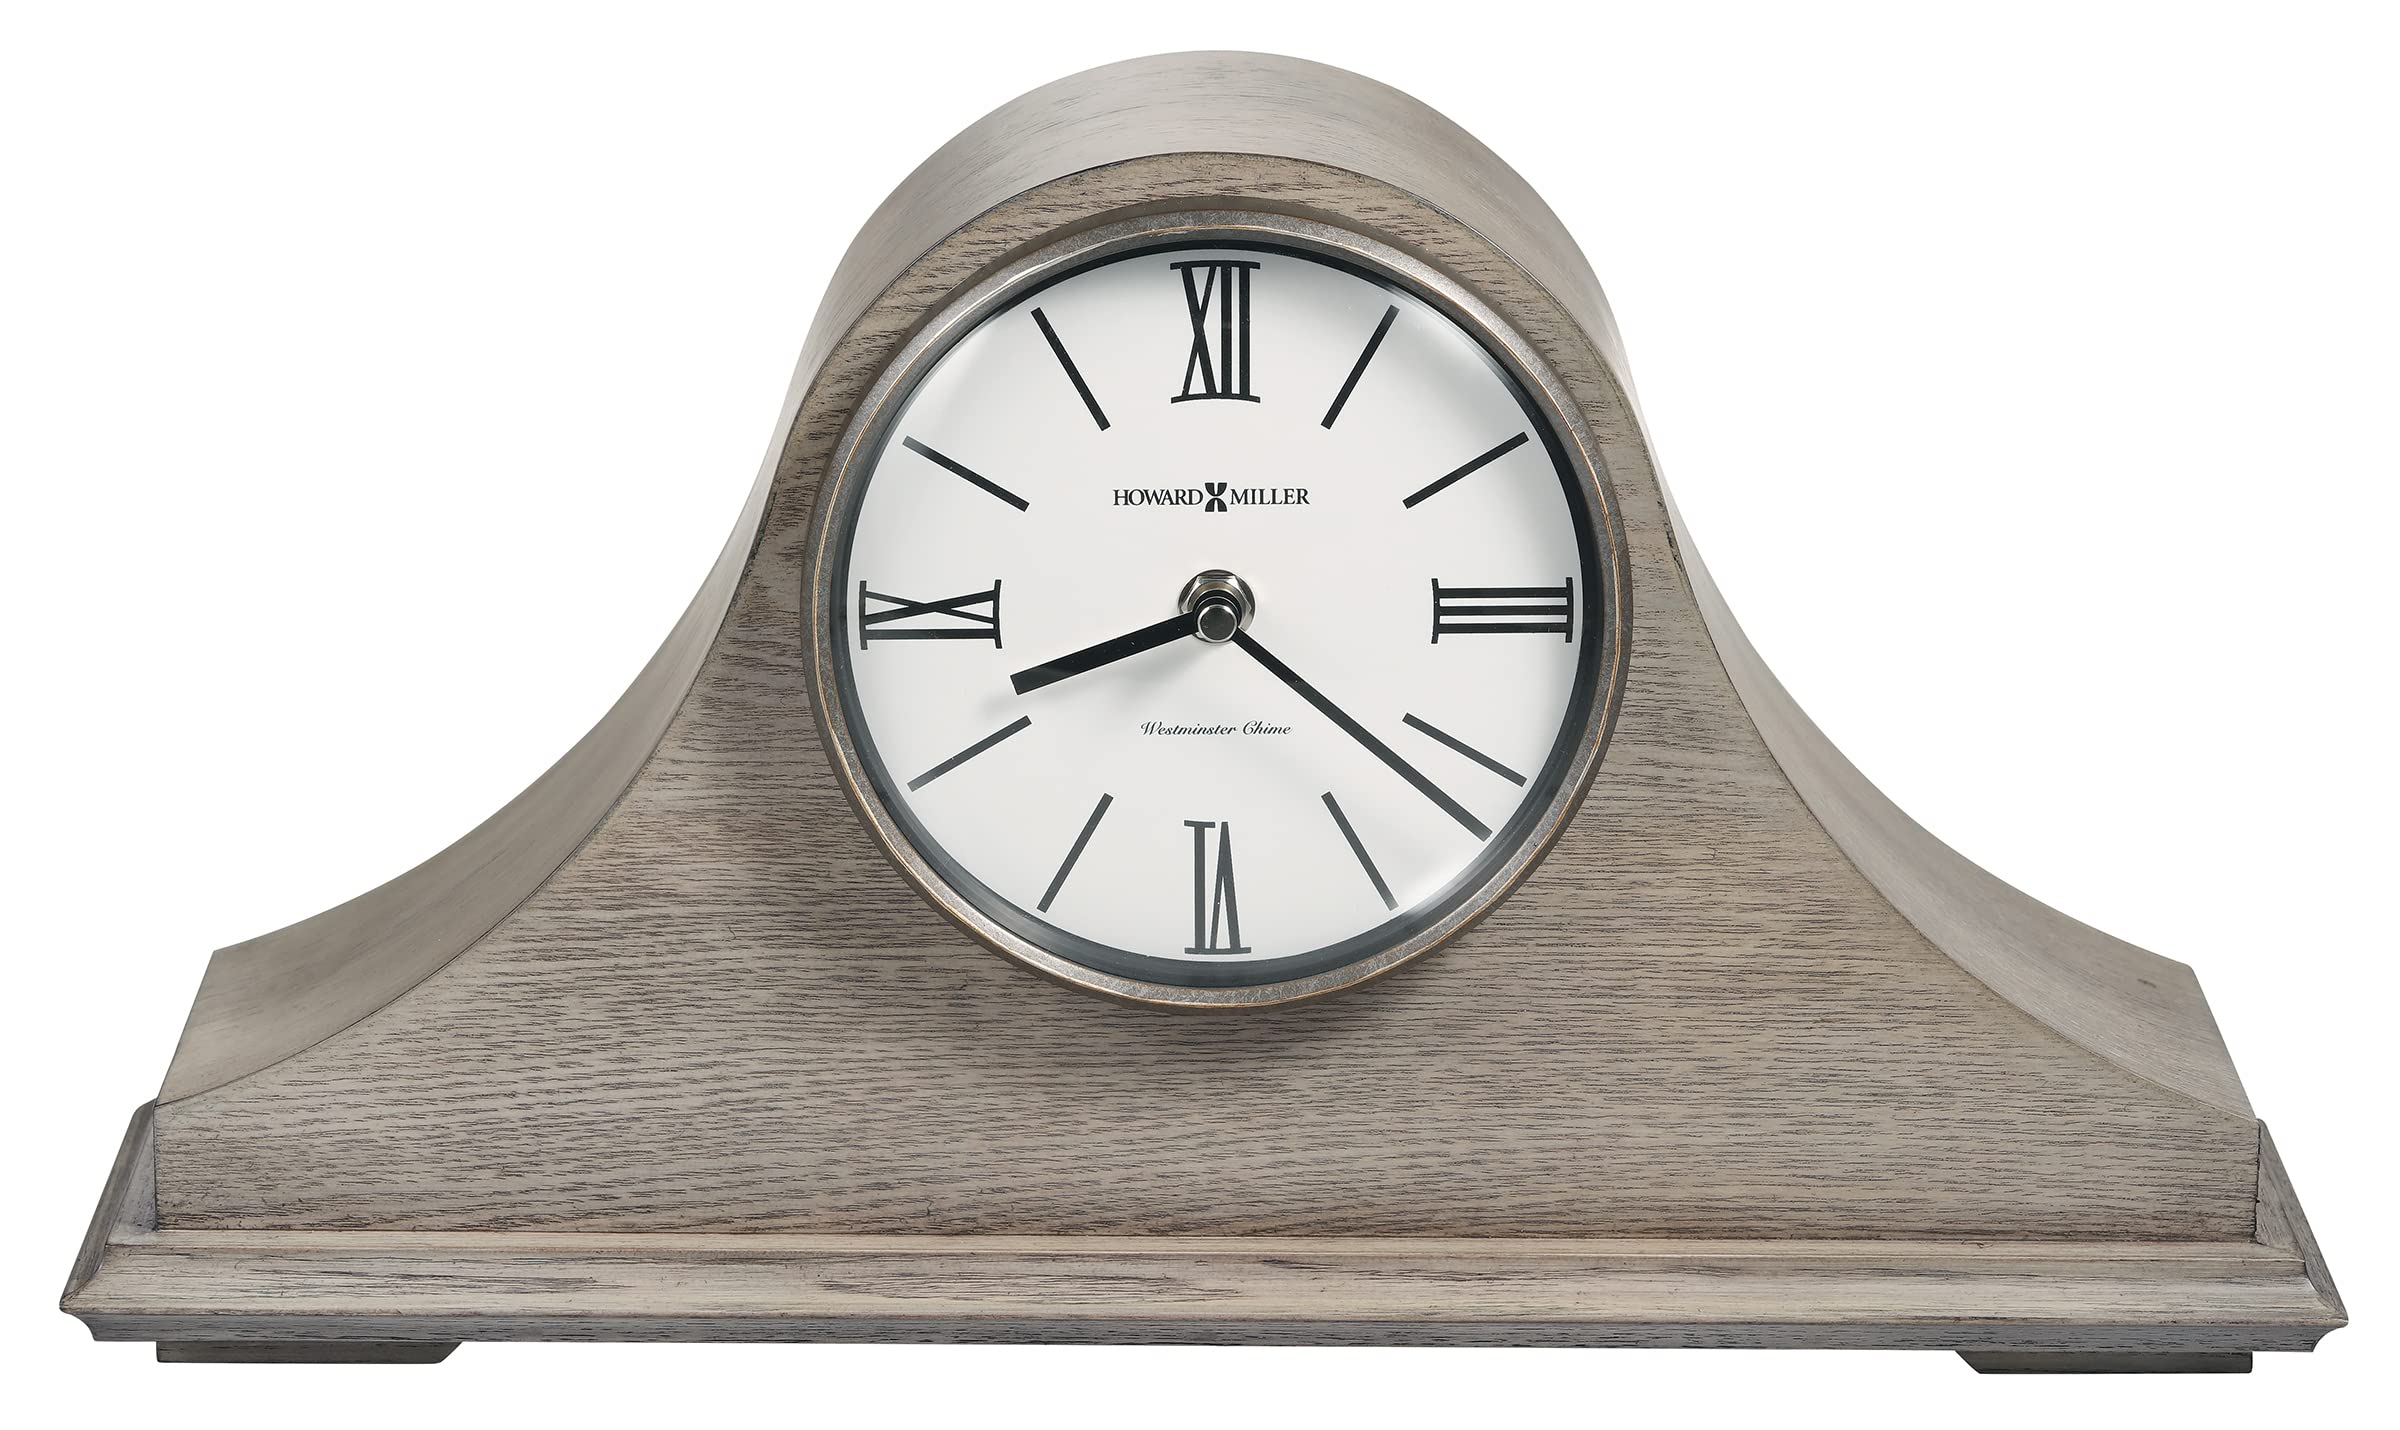 Howard Miller Meade Mantel Clock 547-613 – Seaside Gray Finish, Charcoal Gray Accents, Antique Home Décor, Automatic Nighttime Chime Shut Off, Quartz Single-Chime Movement